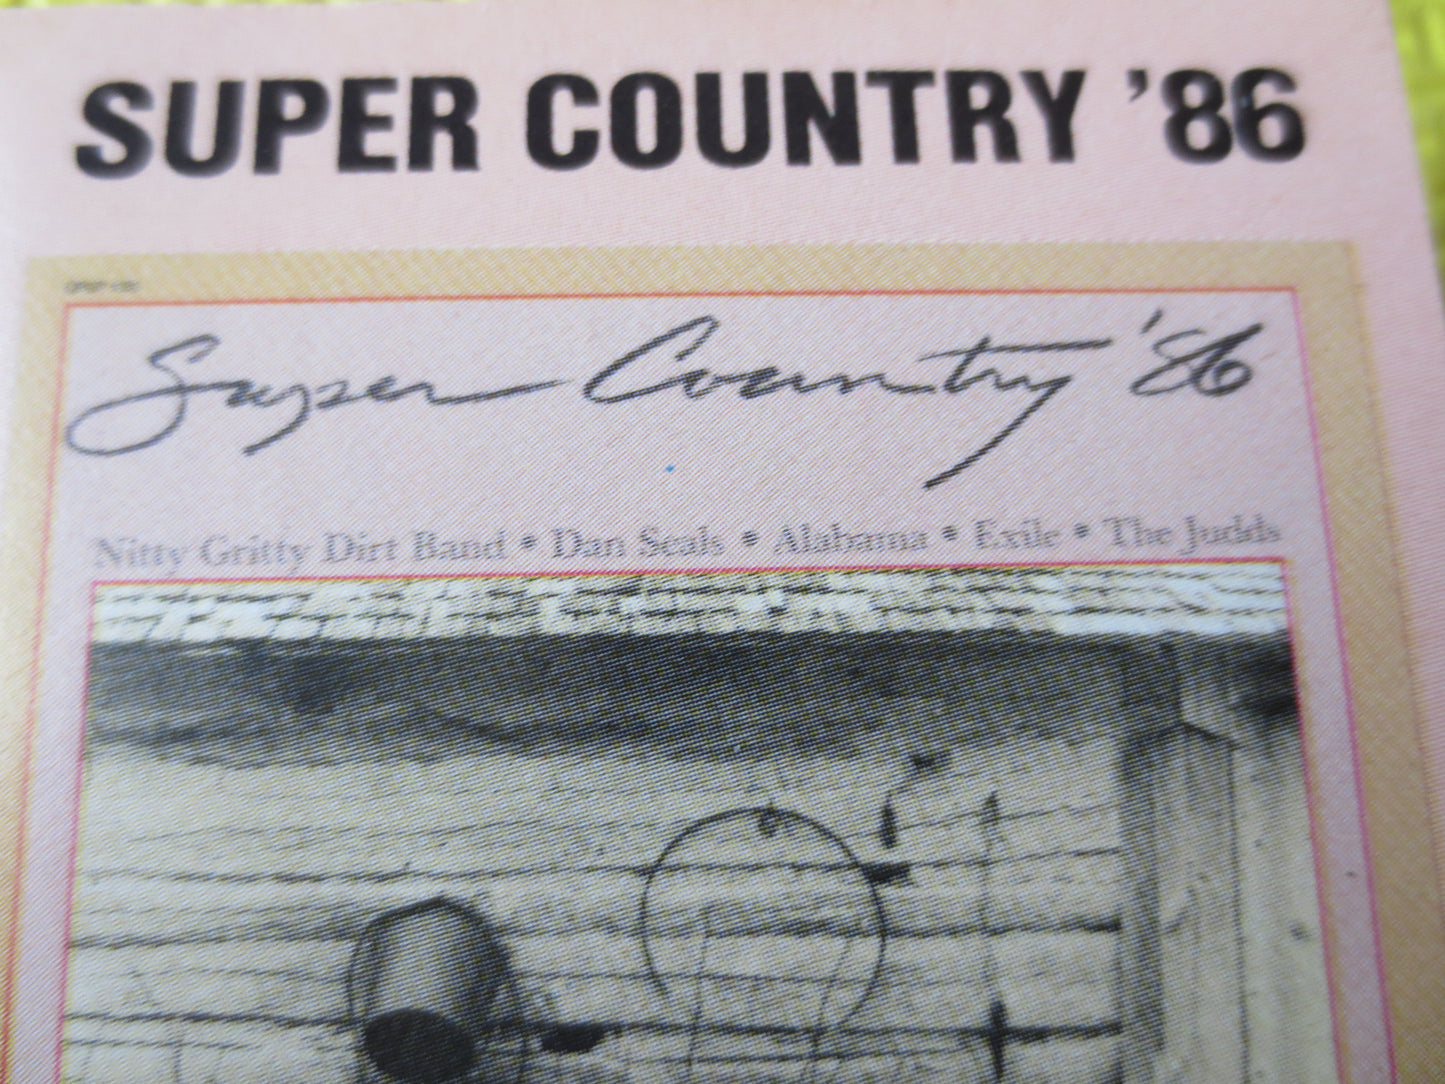 SUPER COUNTRY '86, Kenny Rogers Tape, George Jones Tape, Country Cassette, Exile Tape, Music Tapes, Cassette, Music Cassette